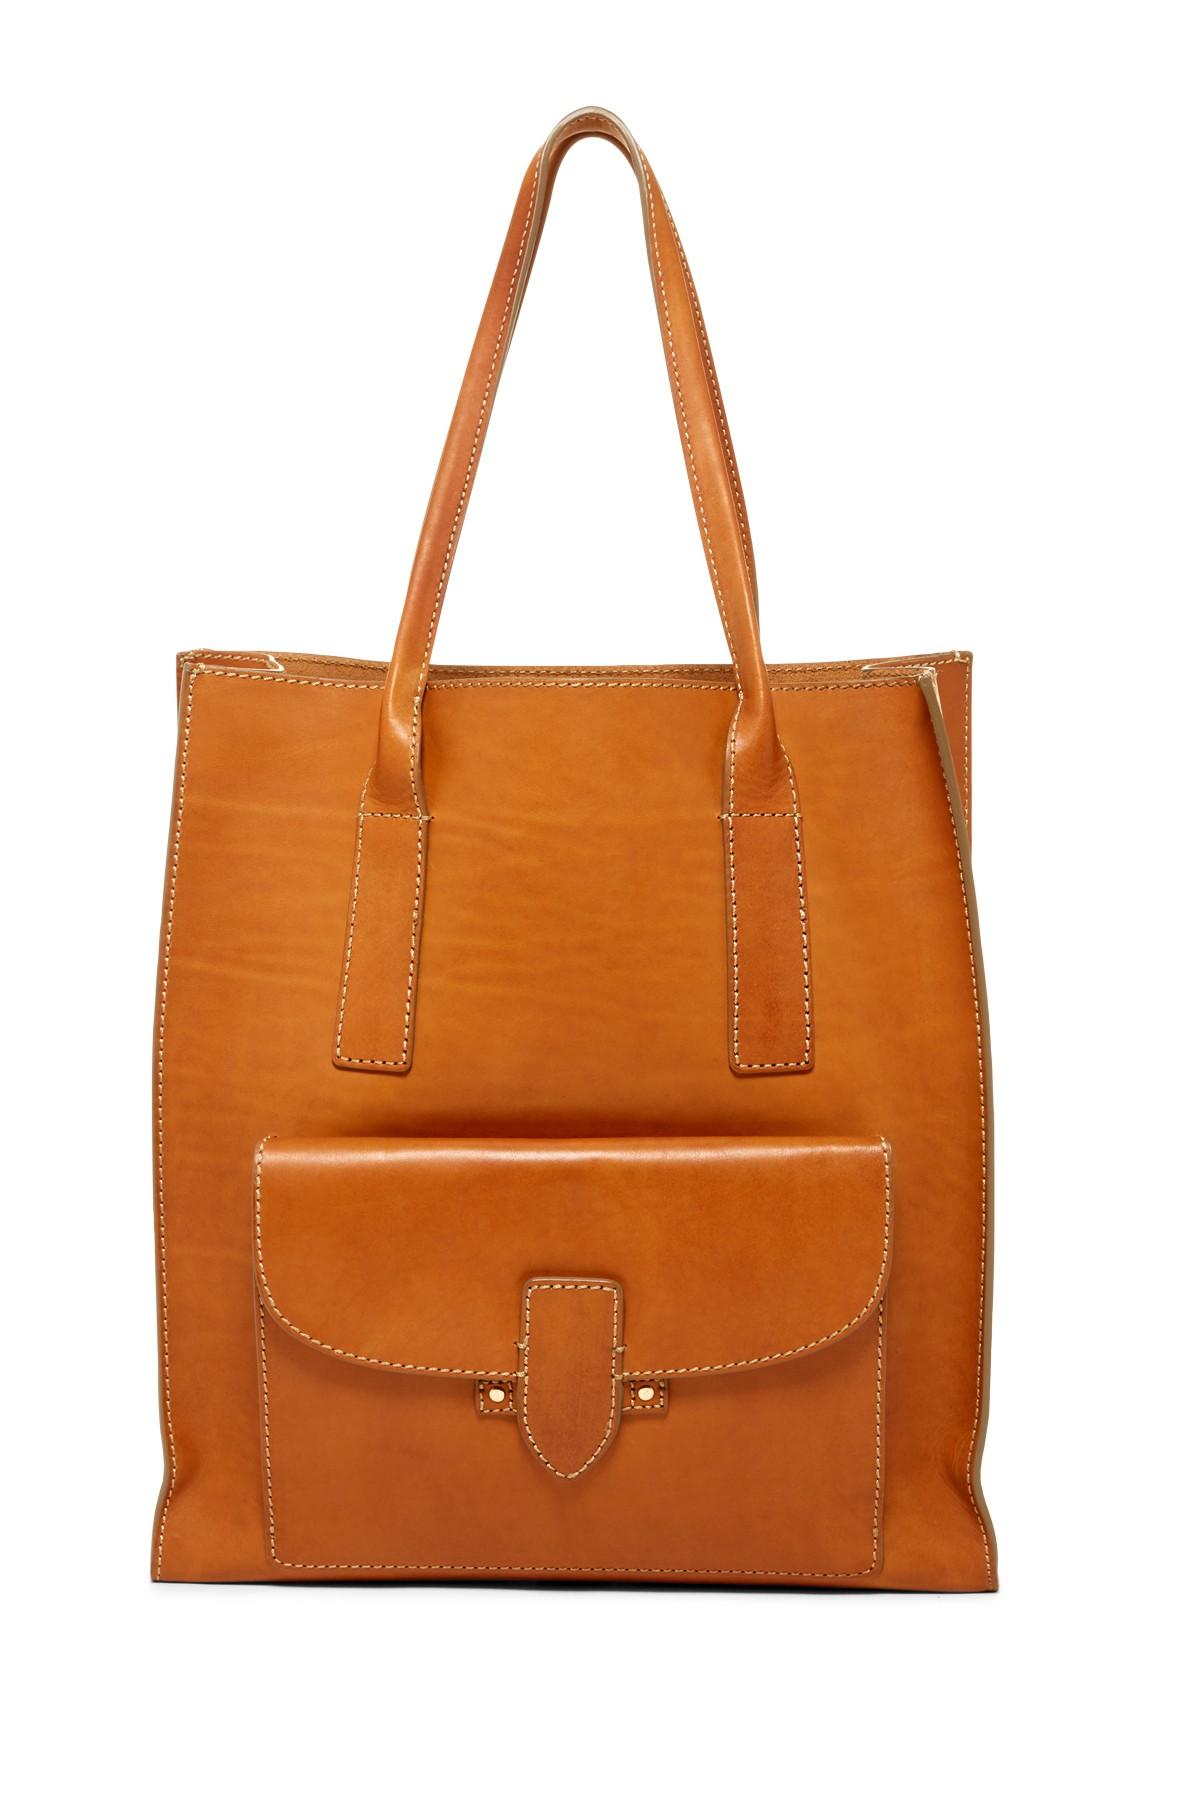 Frye Casey Leather Tote in Tan (Brown) - Lyst